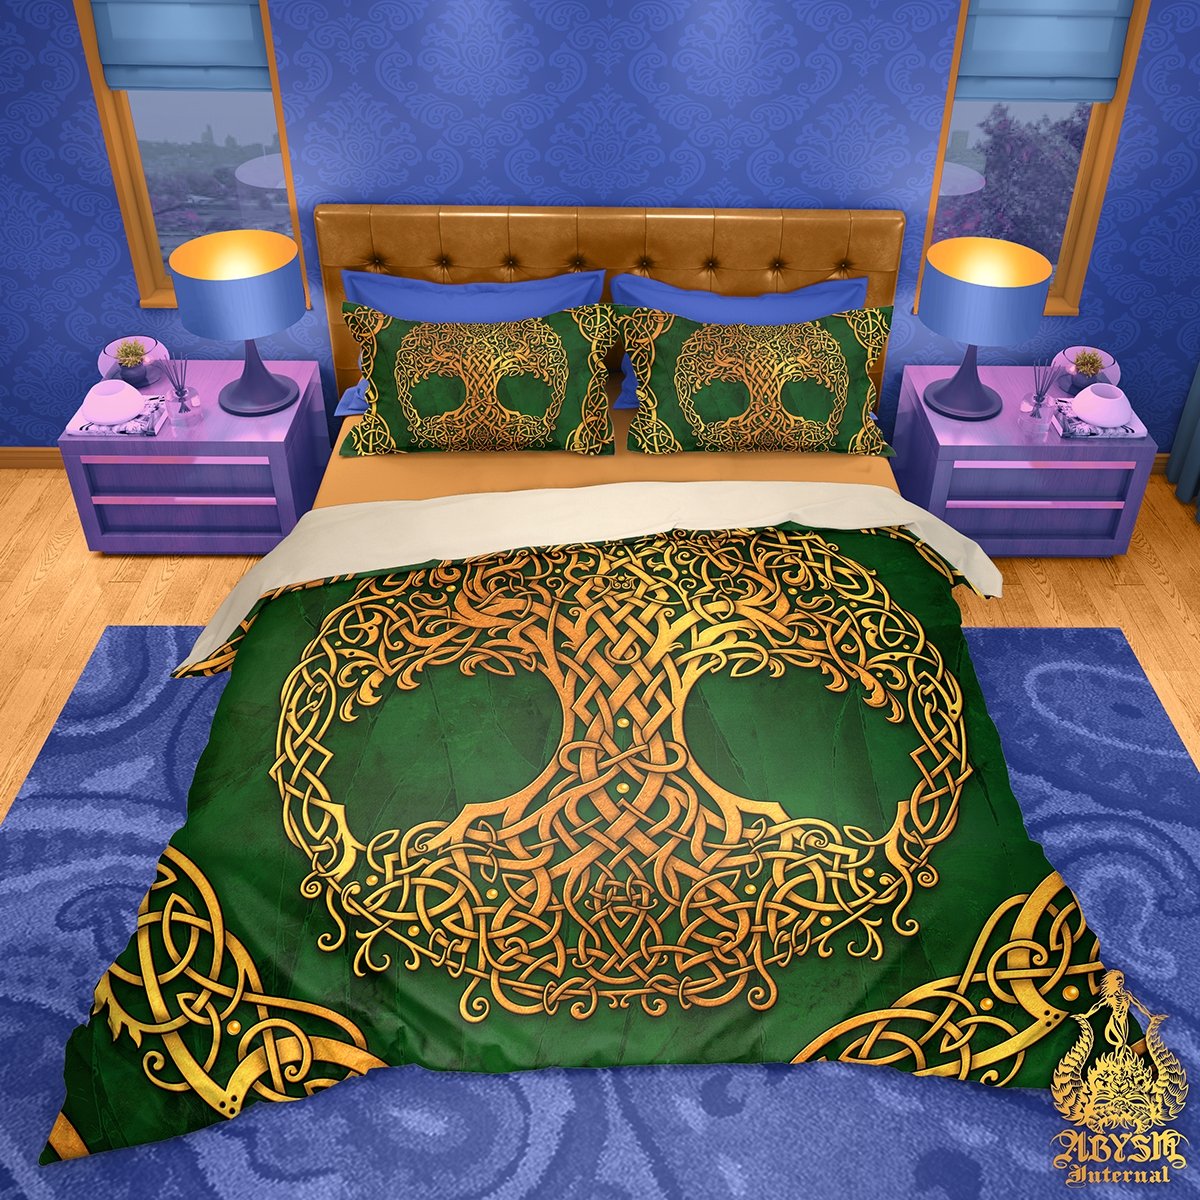 Tree of Life Bedding Set, Comforter and Duvet, Indie Bed Cover, Witchy Bedroom Decor King, Queen and Twin Size - Celtic, Gold and Green - Abysm Internal